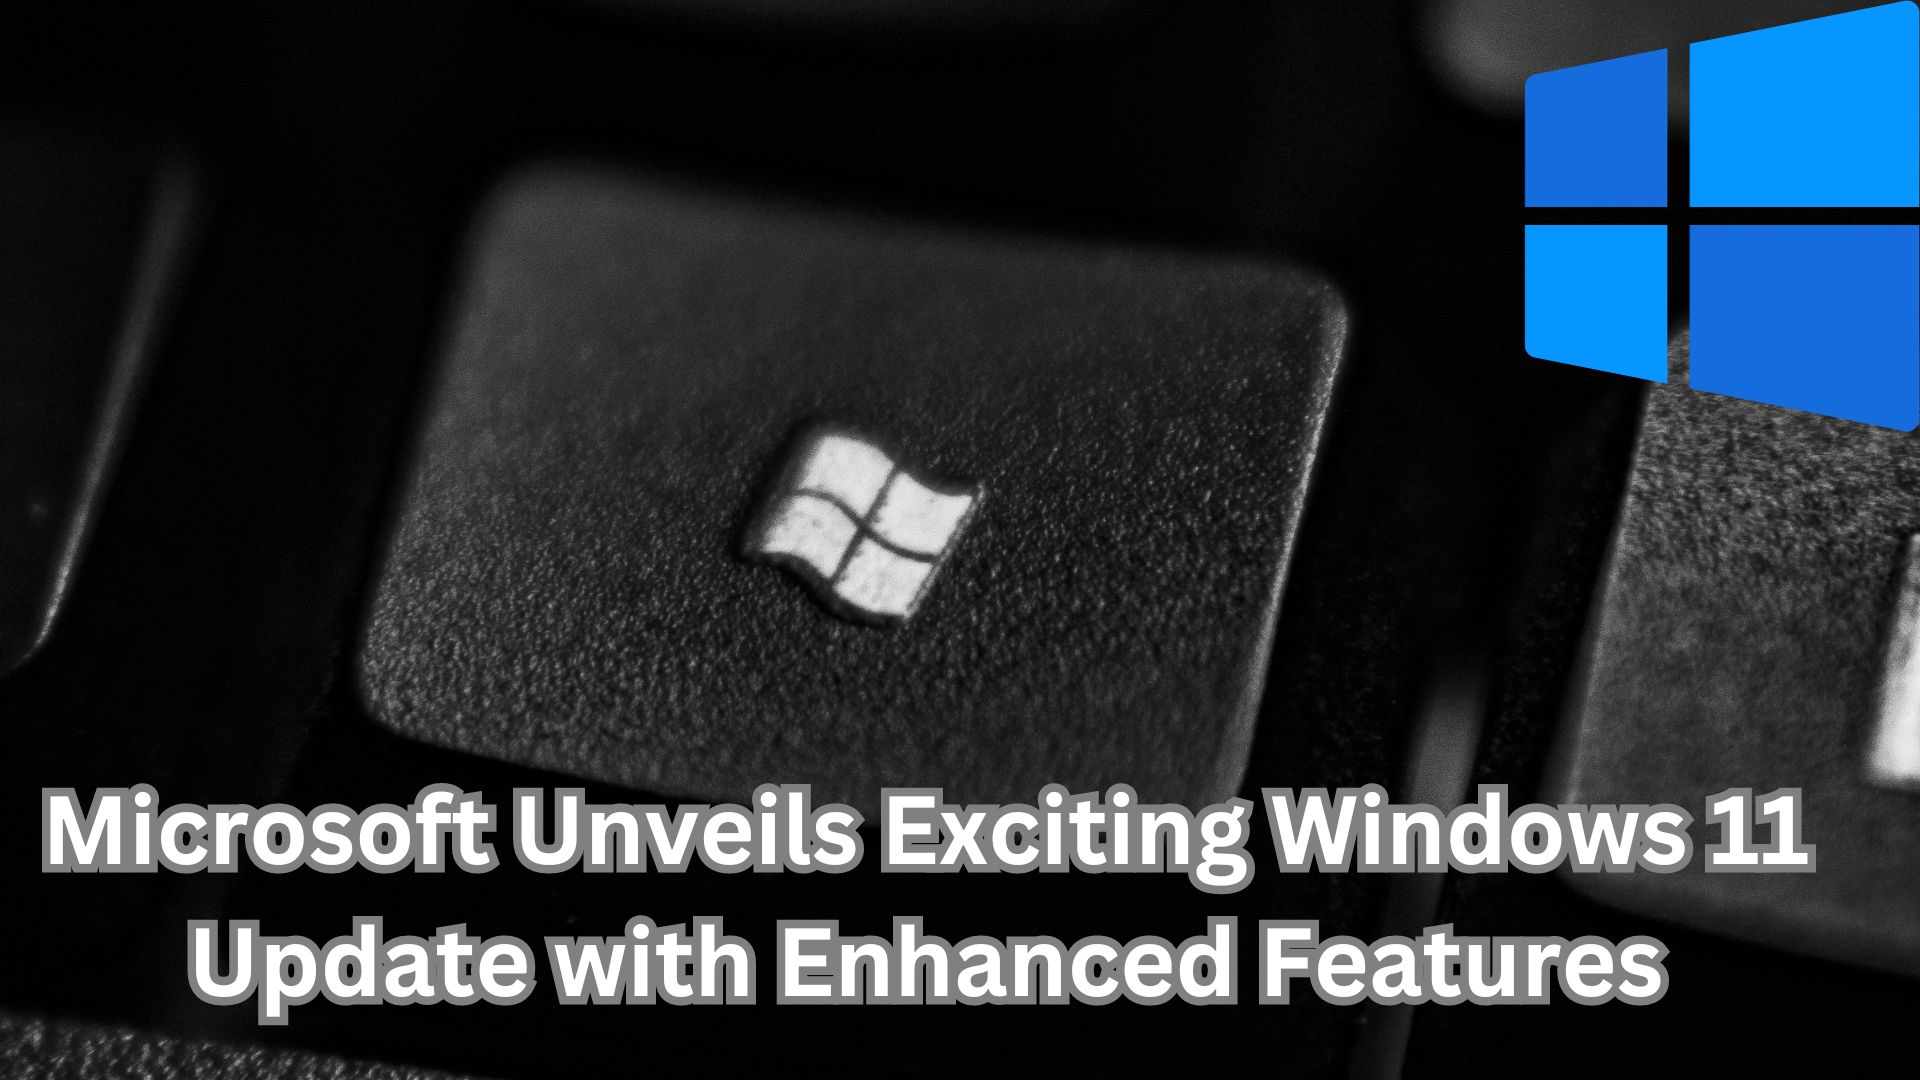 Microsoft Unveils Exciting Windows 11 Update with Enhanced Features